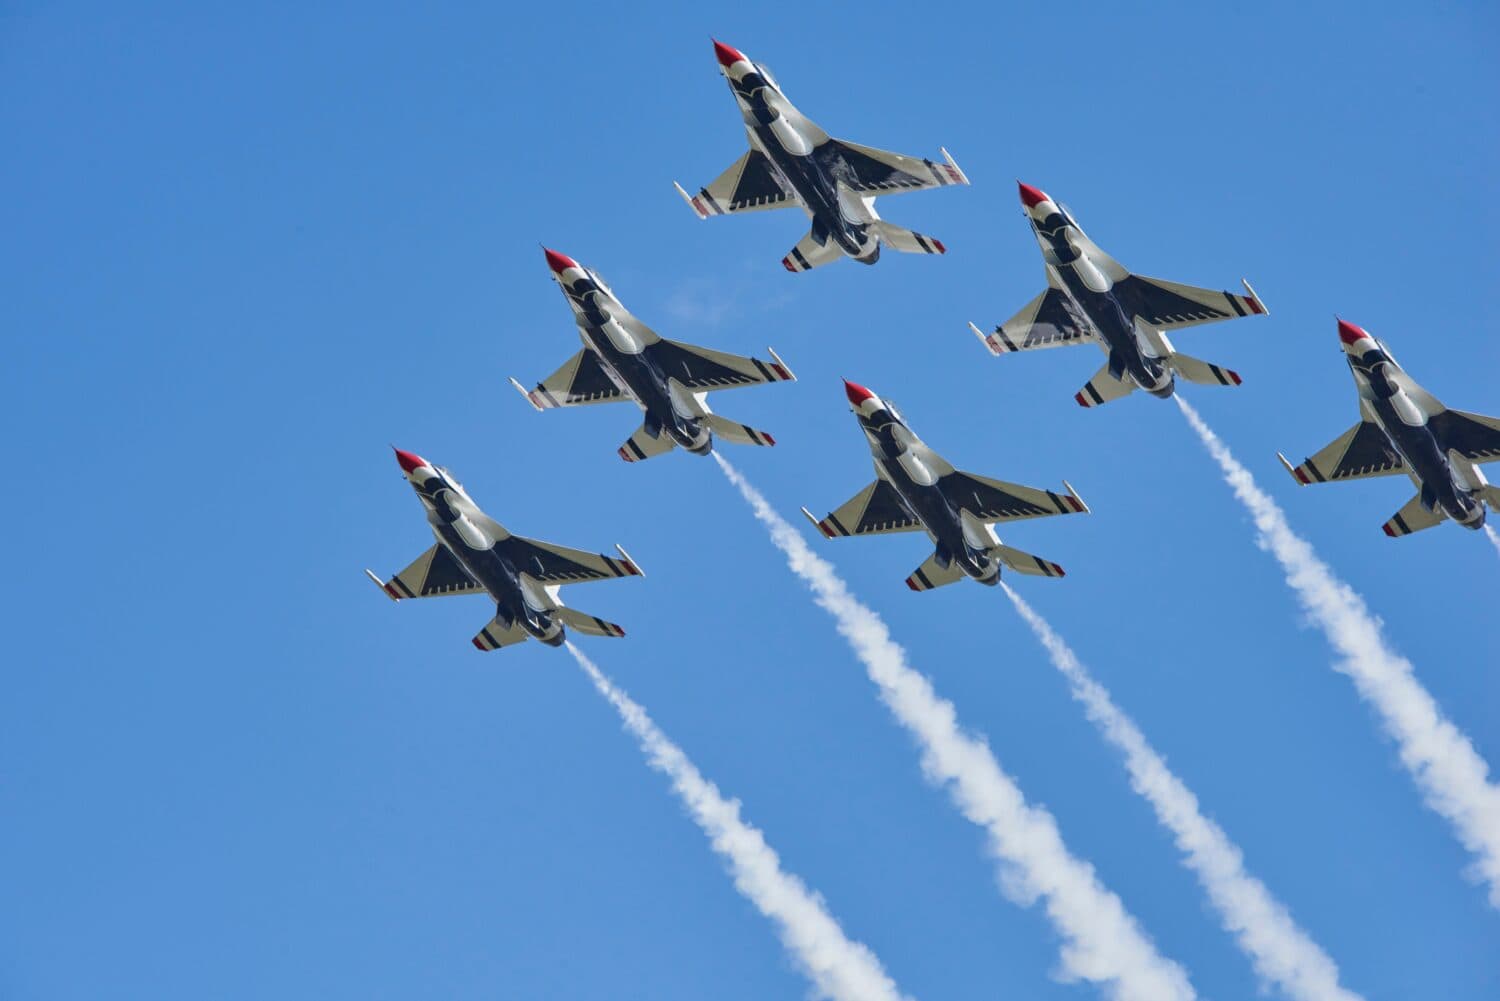 Cleveland National Airshow. Burke Lakefront Airport. September 3, 2023. US Air Force Thunderbird Jets in formation.